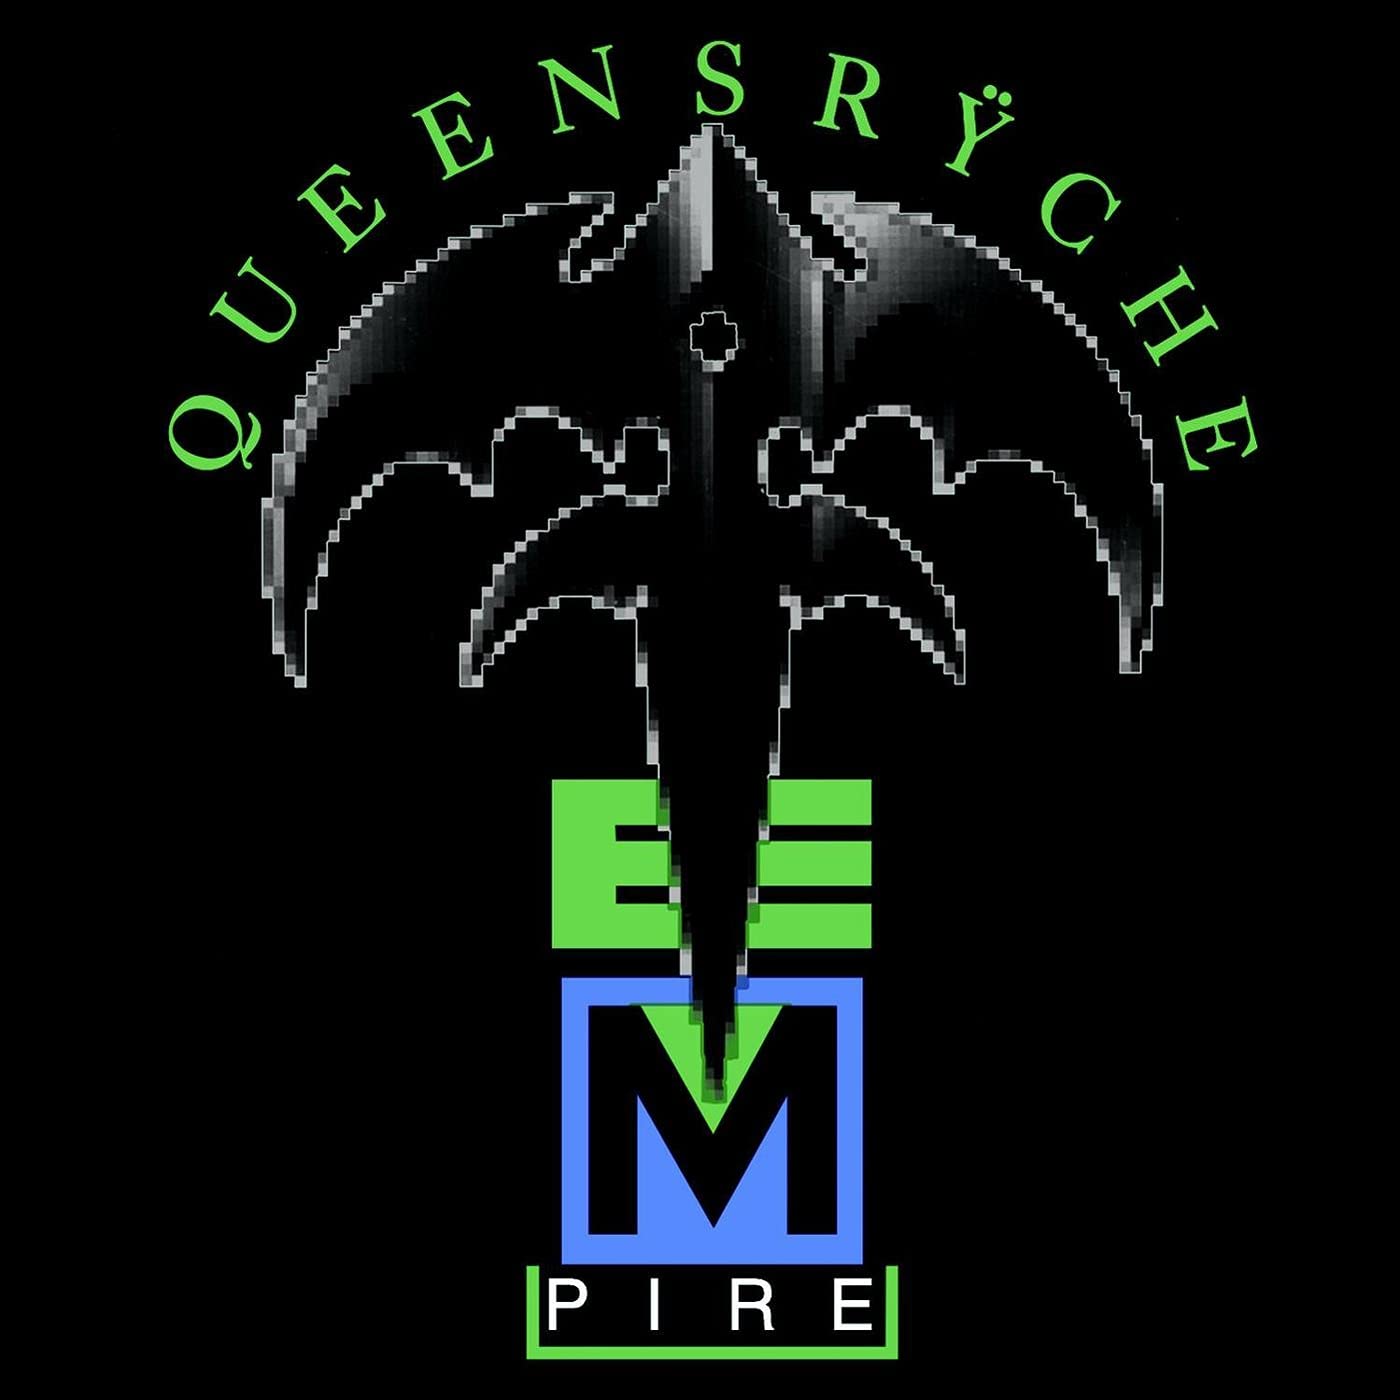 QUEENSRYCHE - Empire (Remastered) - 2CD Set